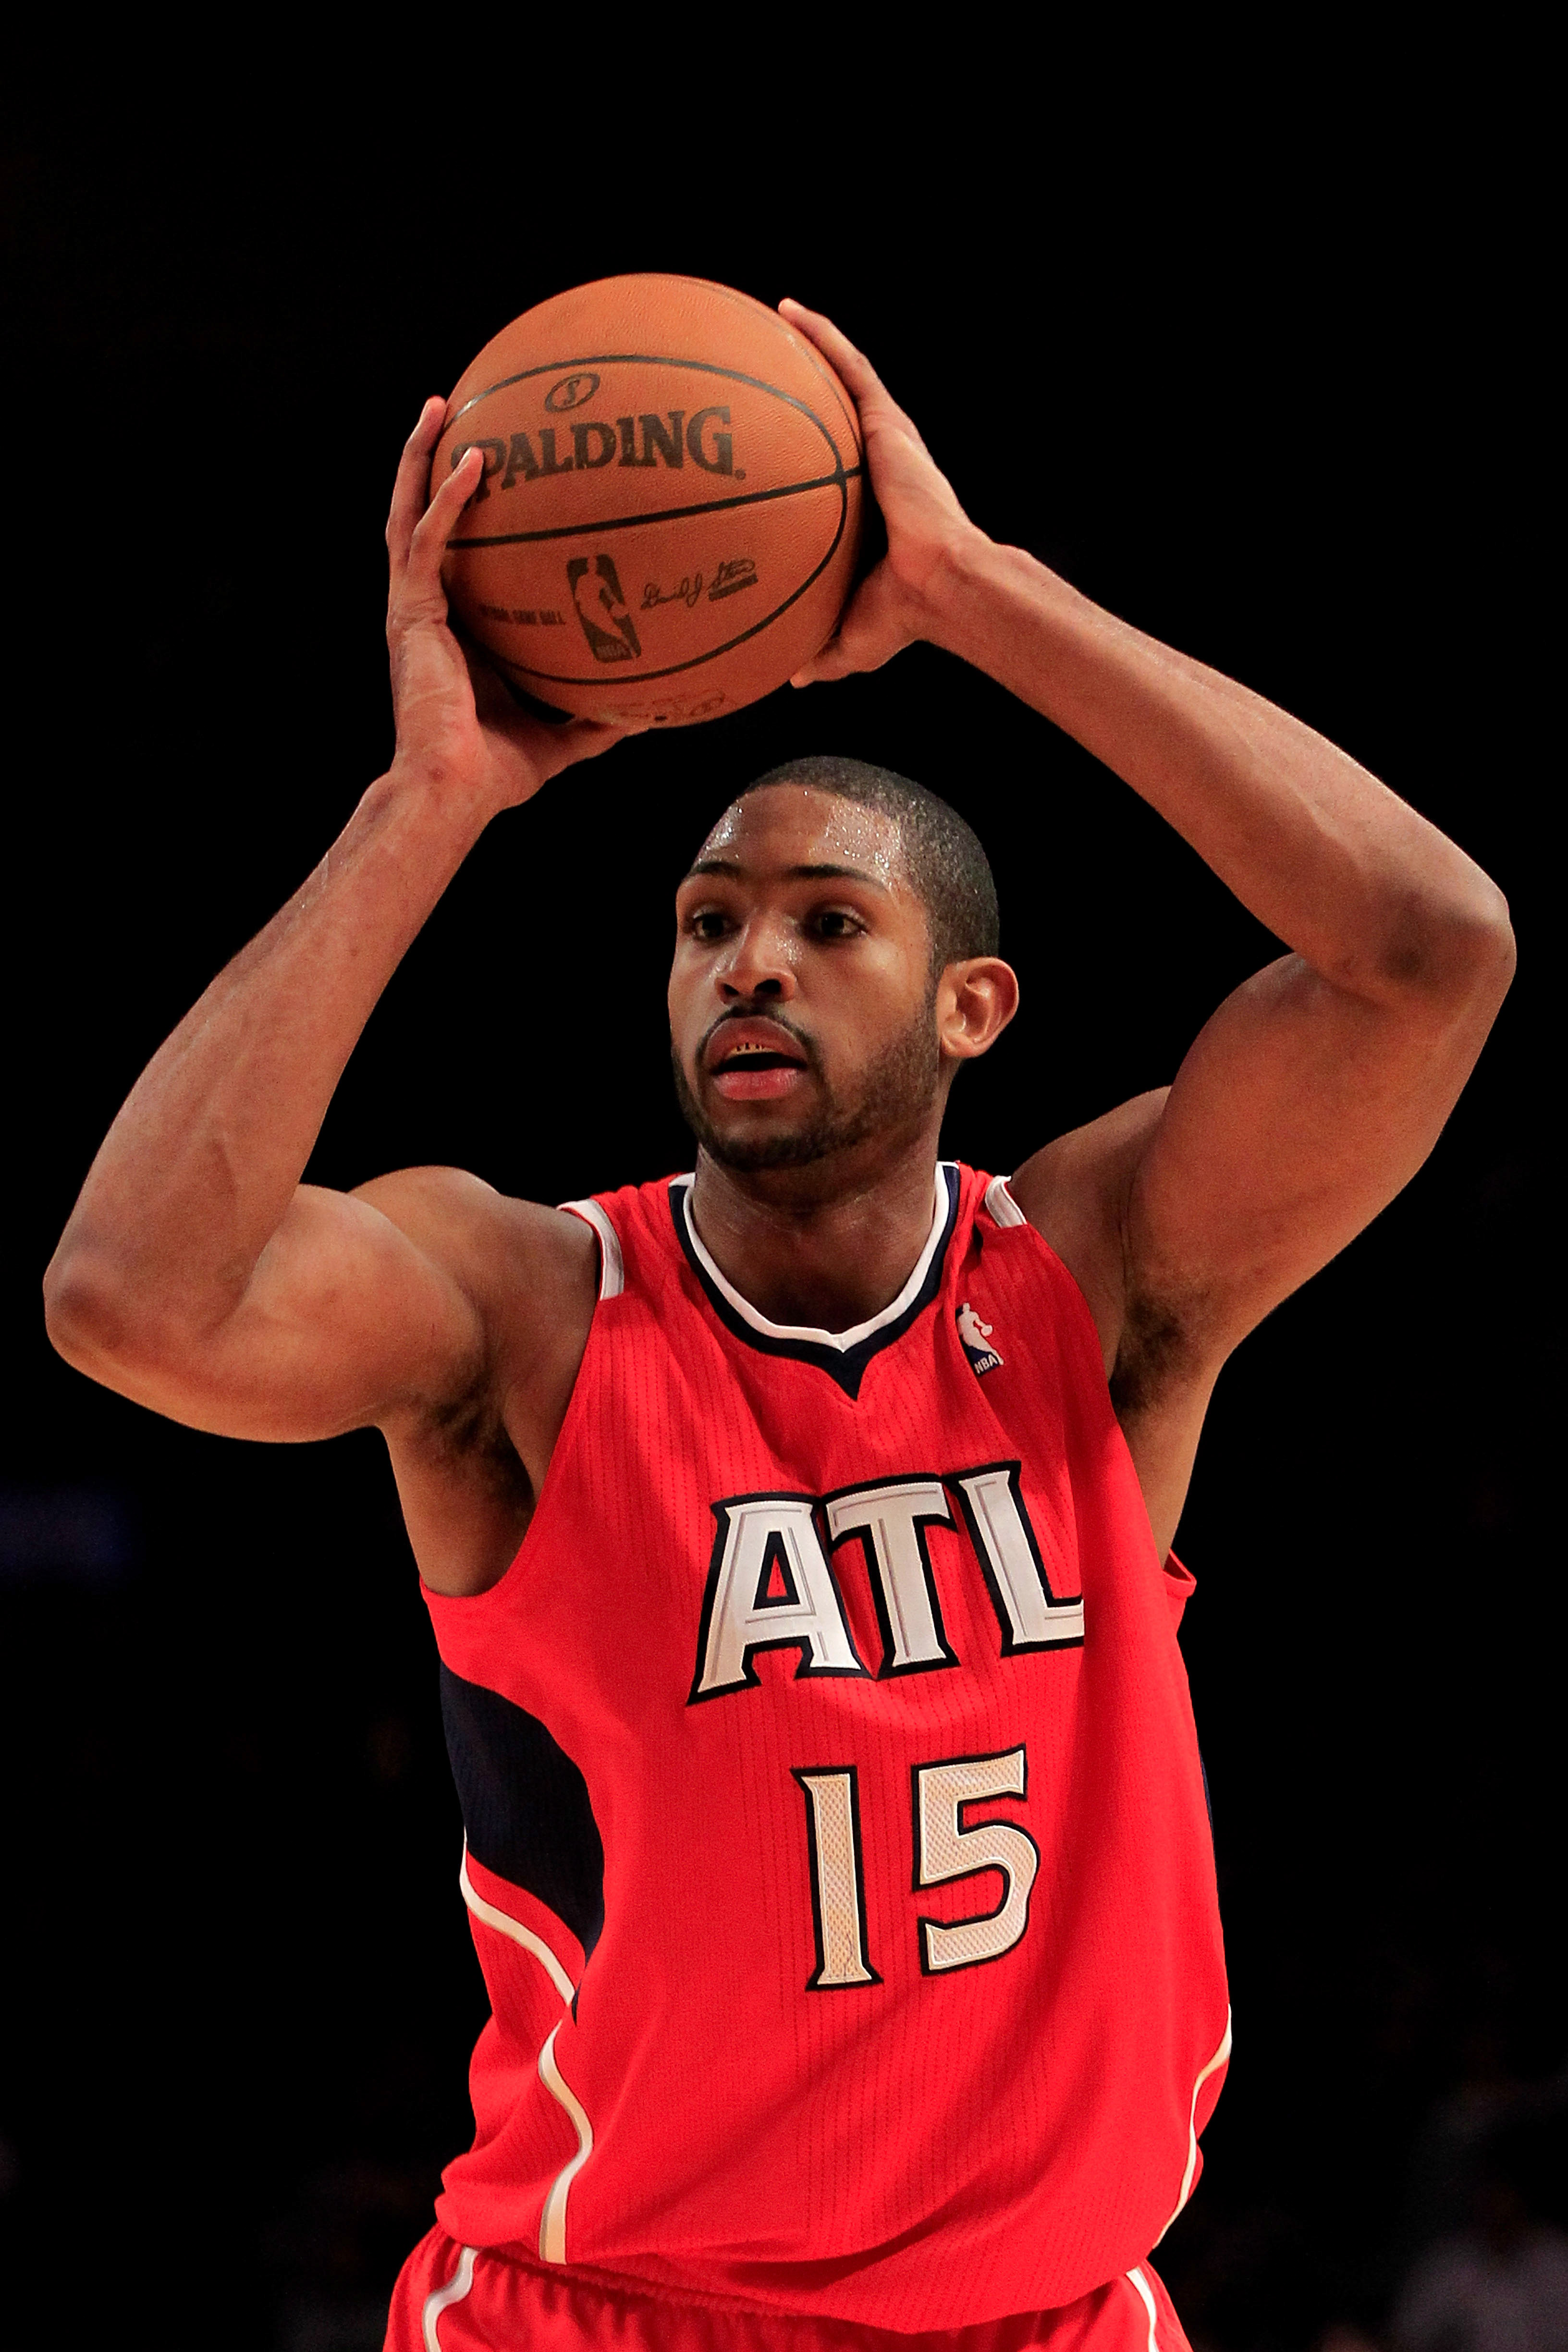 NEW YORK, NY - FEBRUARY 16:  Al Horford #15 of the Atlanta Hawks on the court against the New York Knicks at Madison Square Garden on February 16, 2011 in New York City. NOTE TO USER: User expressly acknowledges and agrees that, by downloading and/or usin